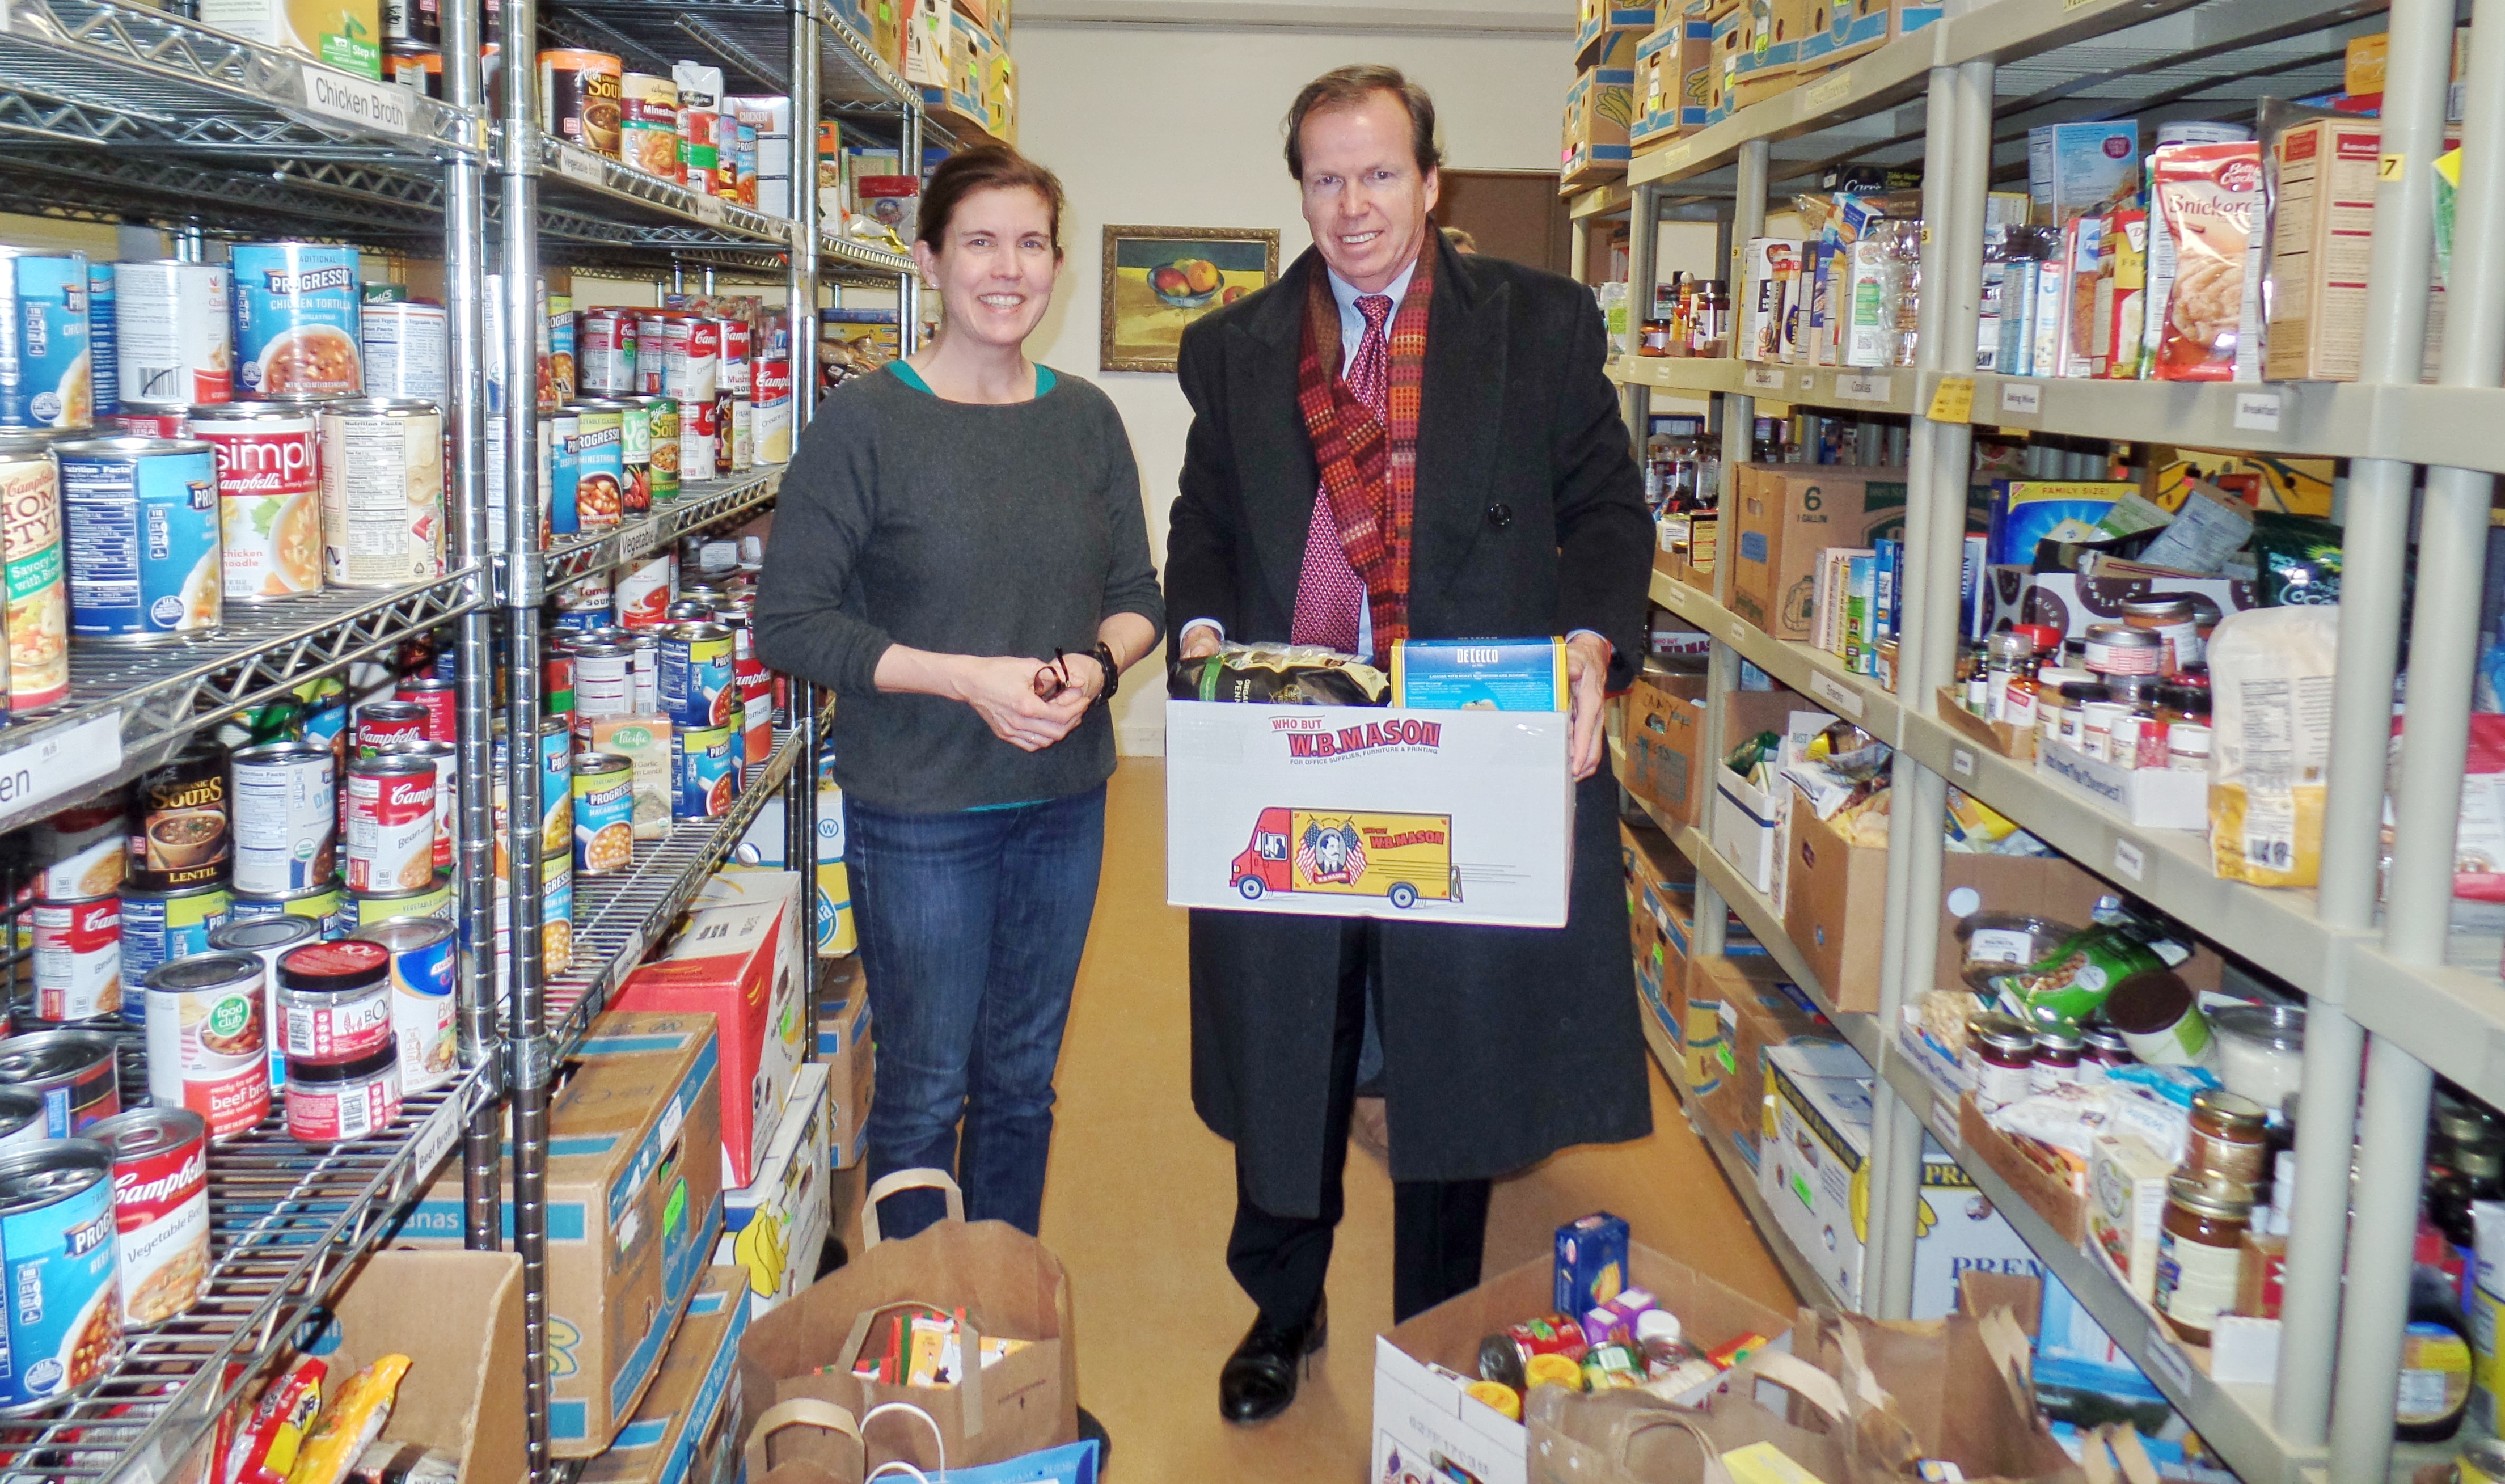 Register O'Donnell Delivers Donated Food to Wellesley Food Pantry